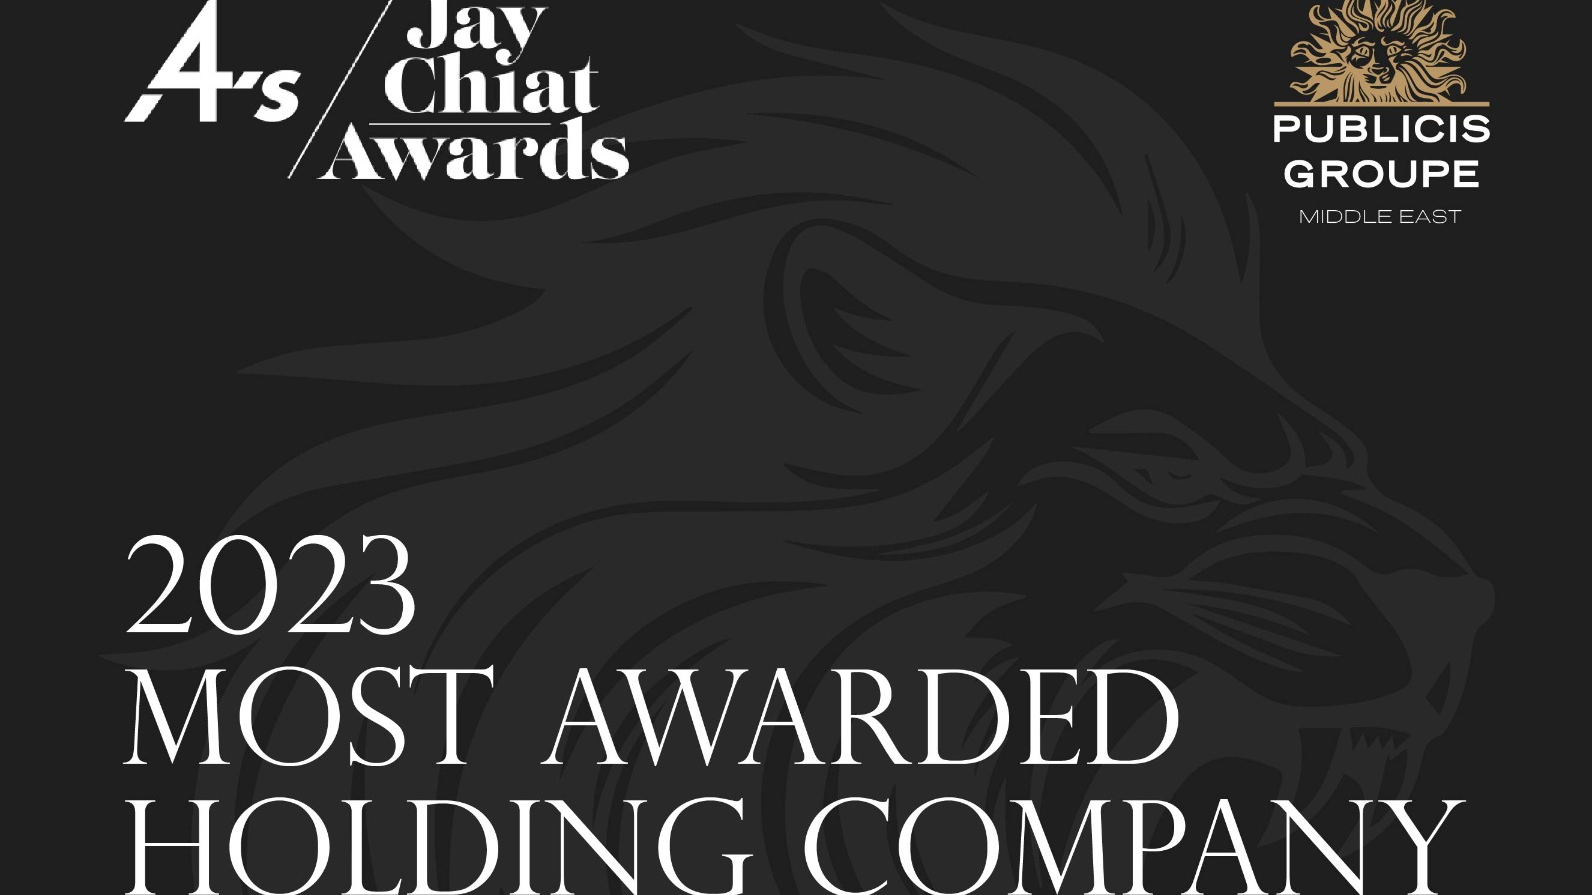 https://adgully.me/post/3655/publicis-groupe-middle-east-dominates-4as-jay-chiat-awards